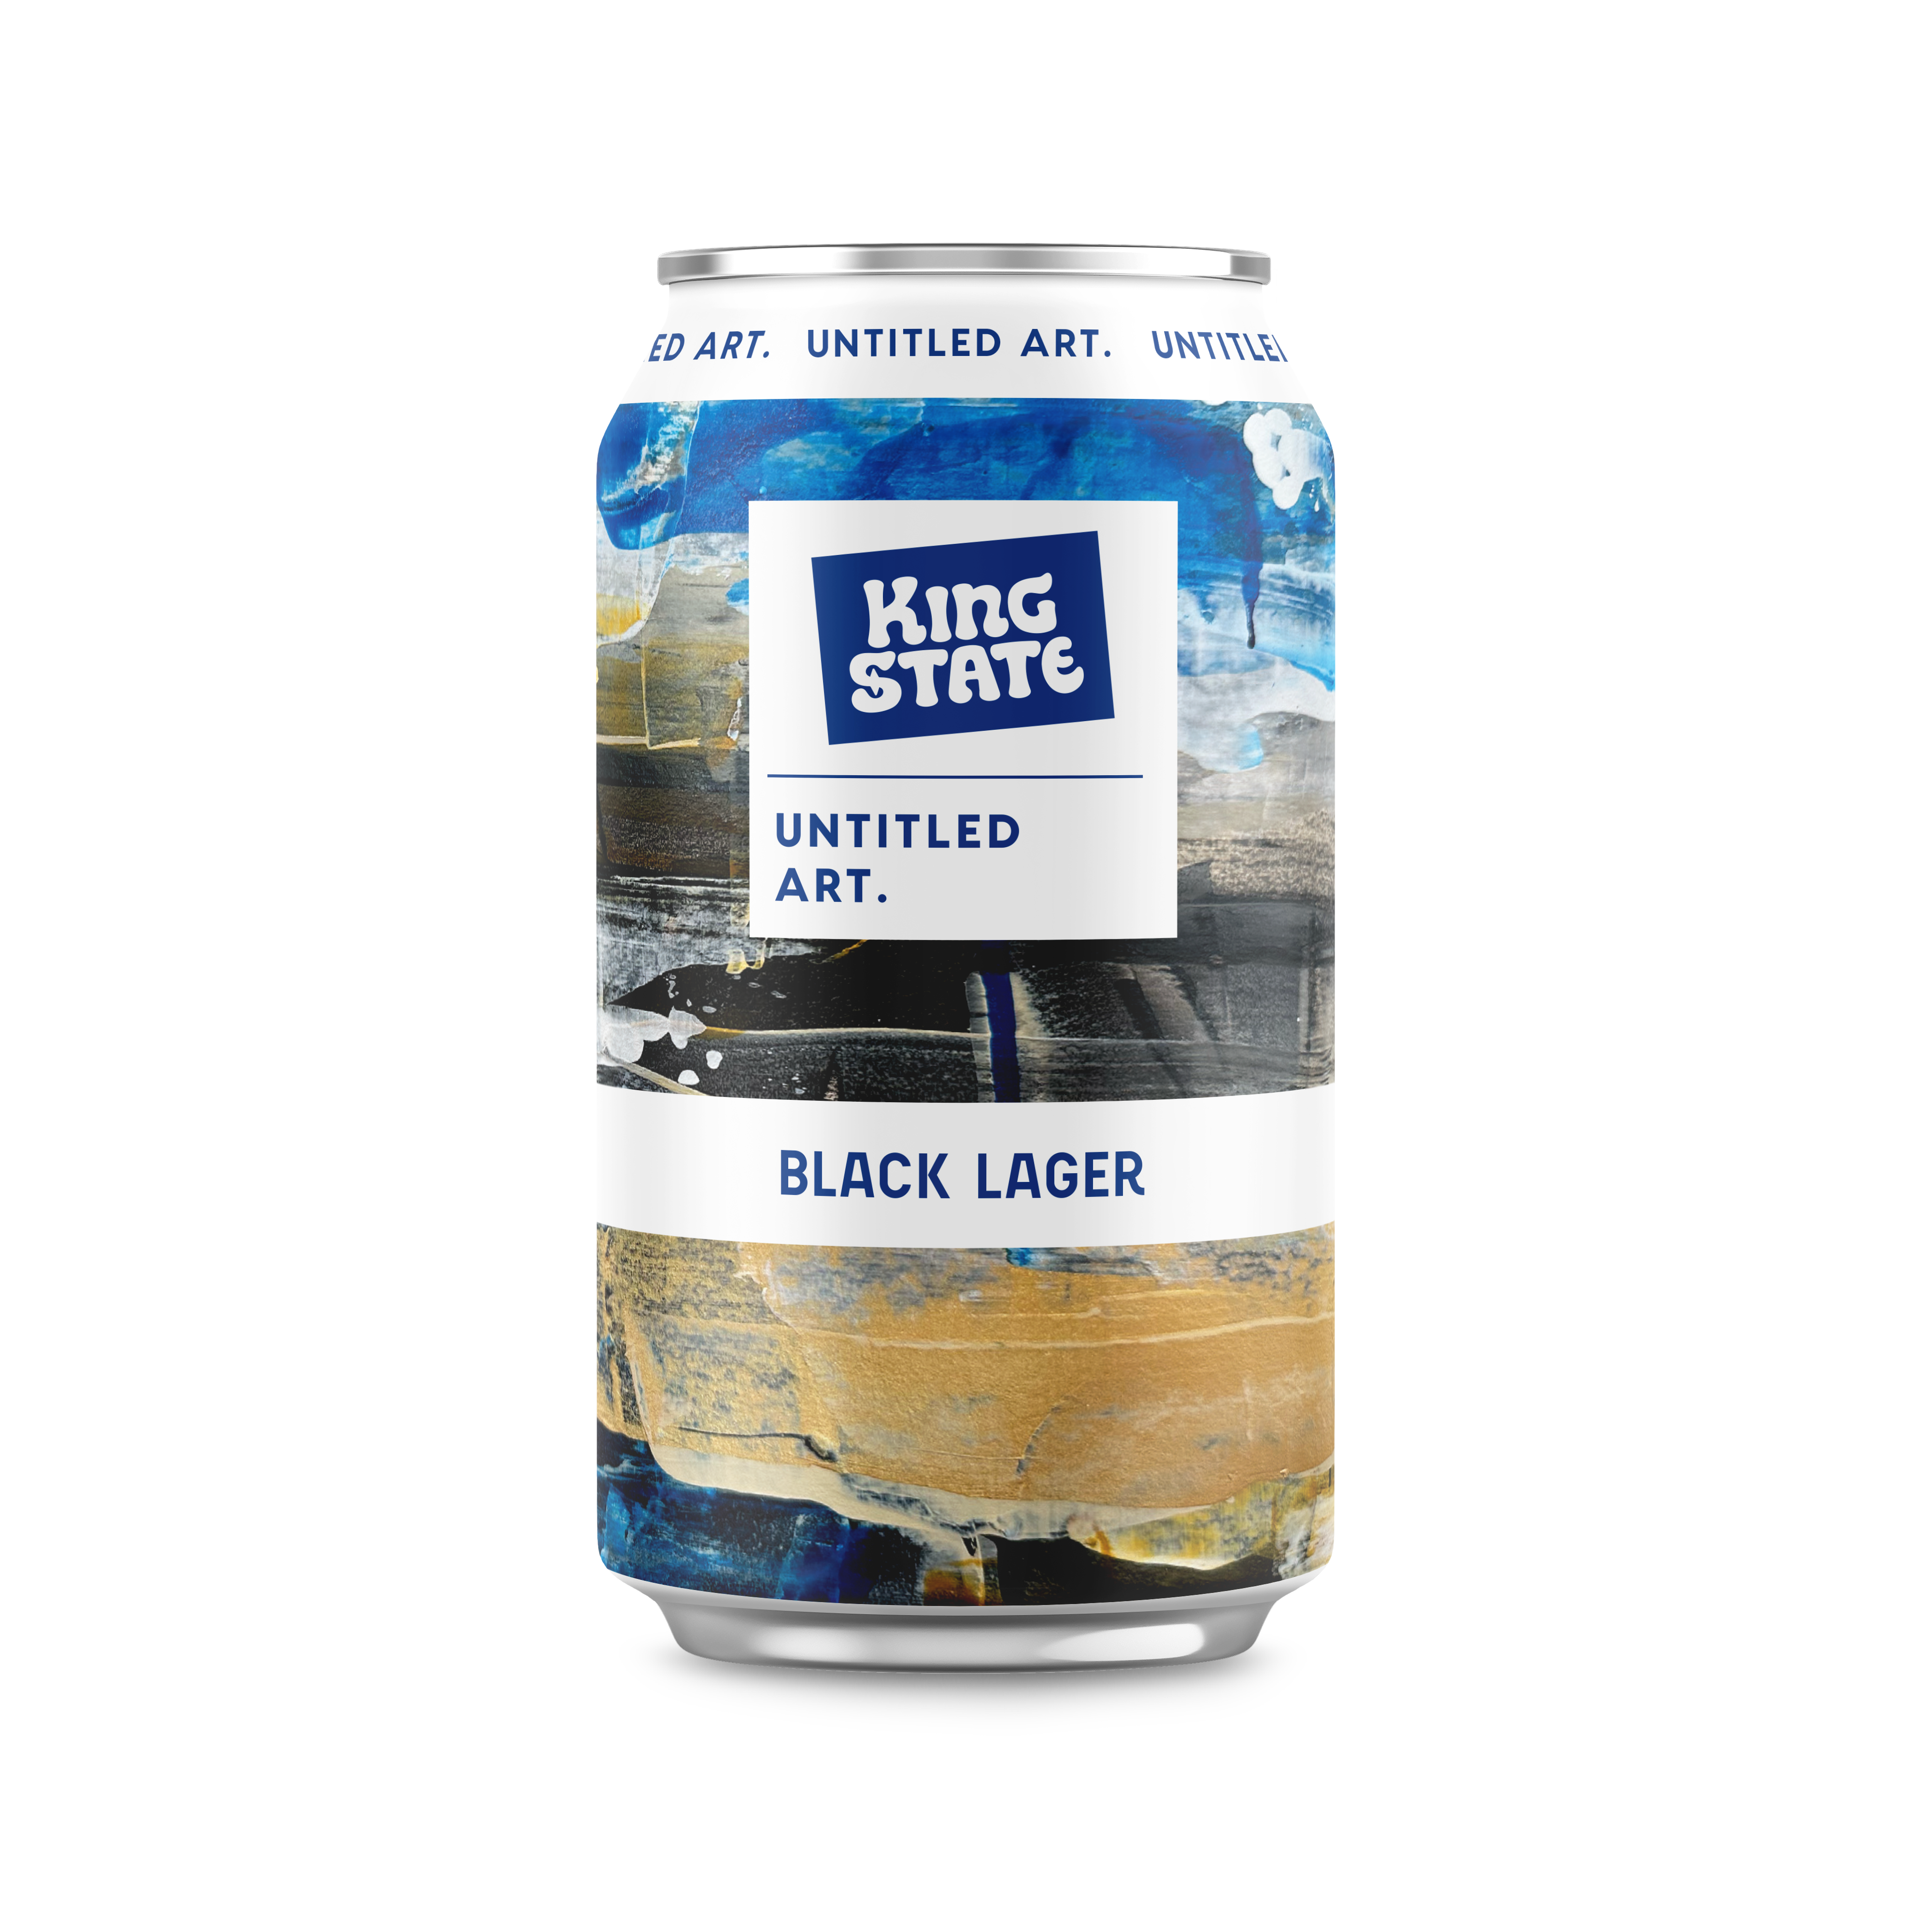 King state unified art black lager.